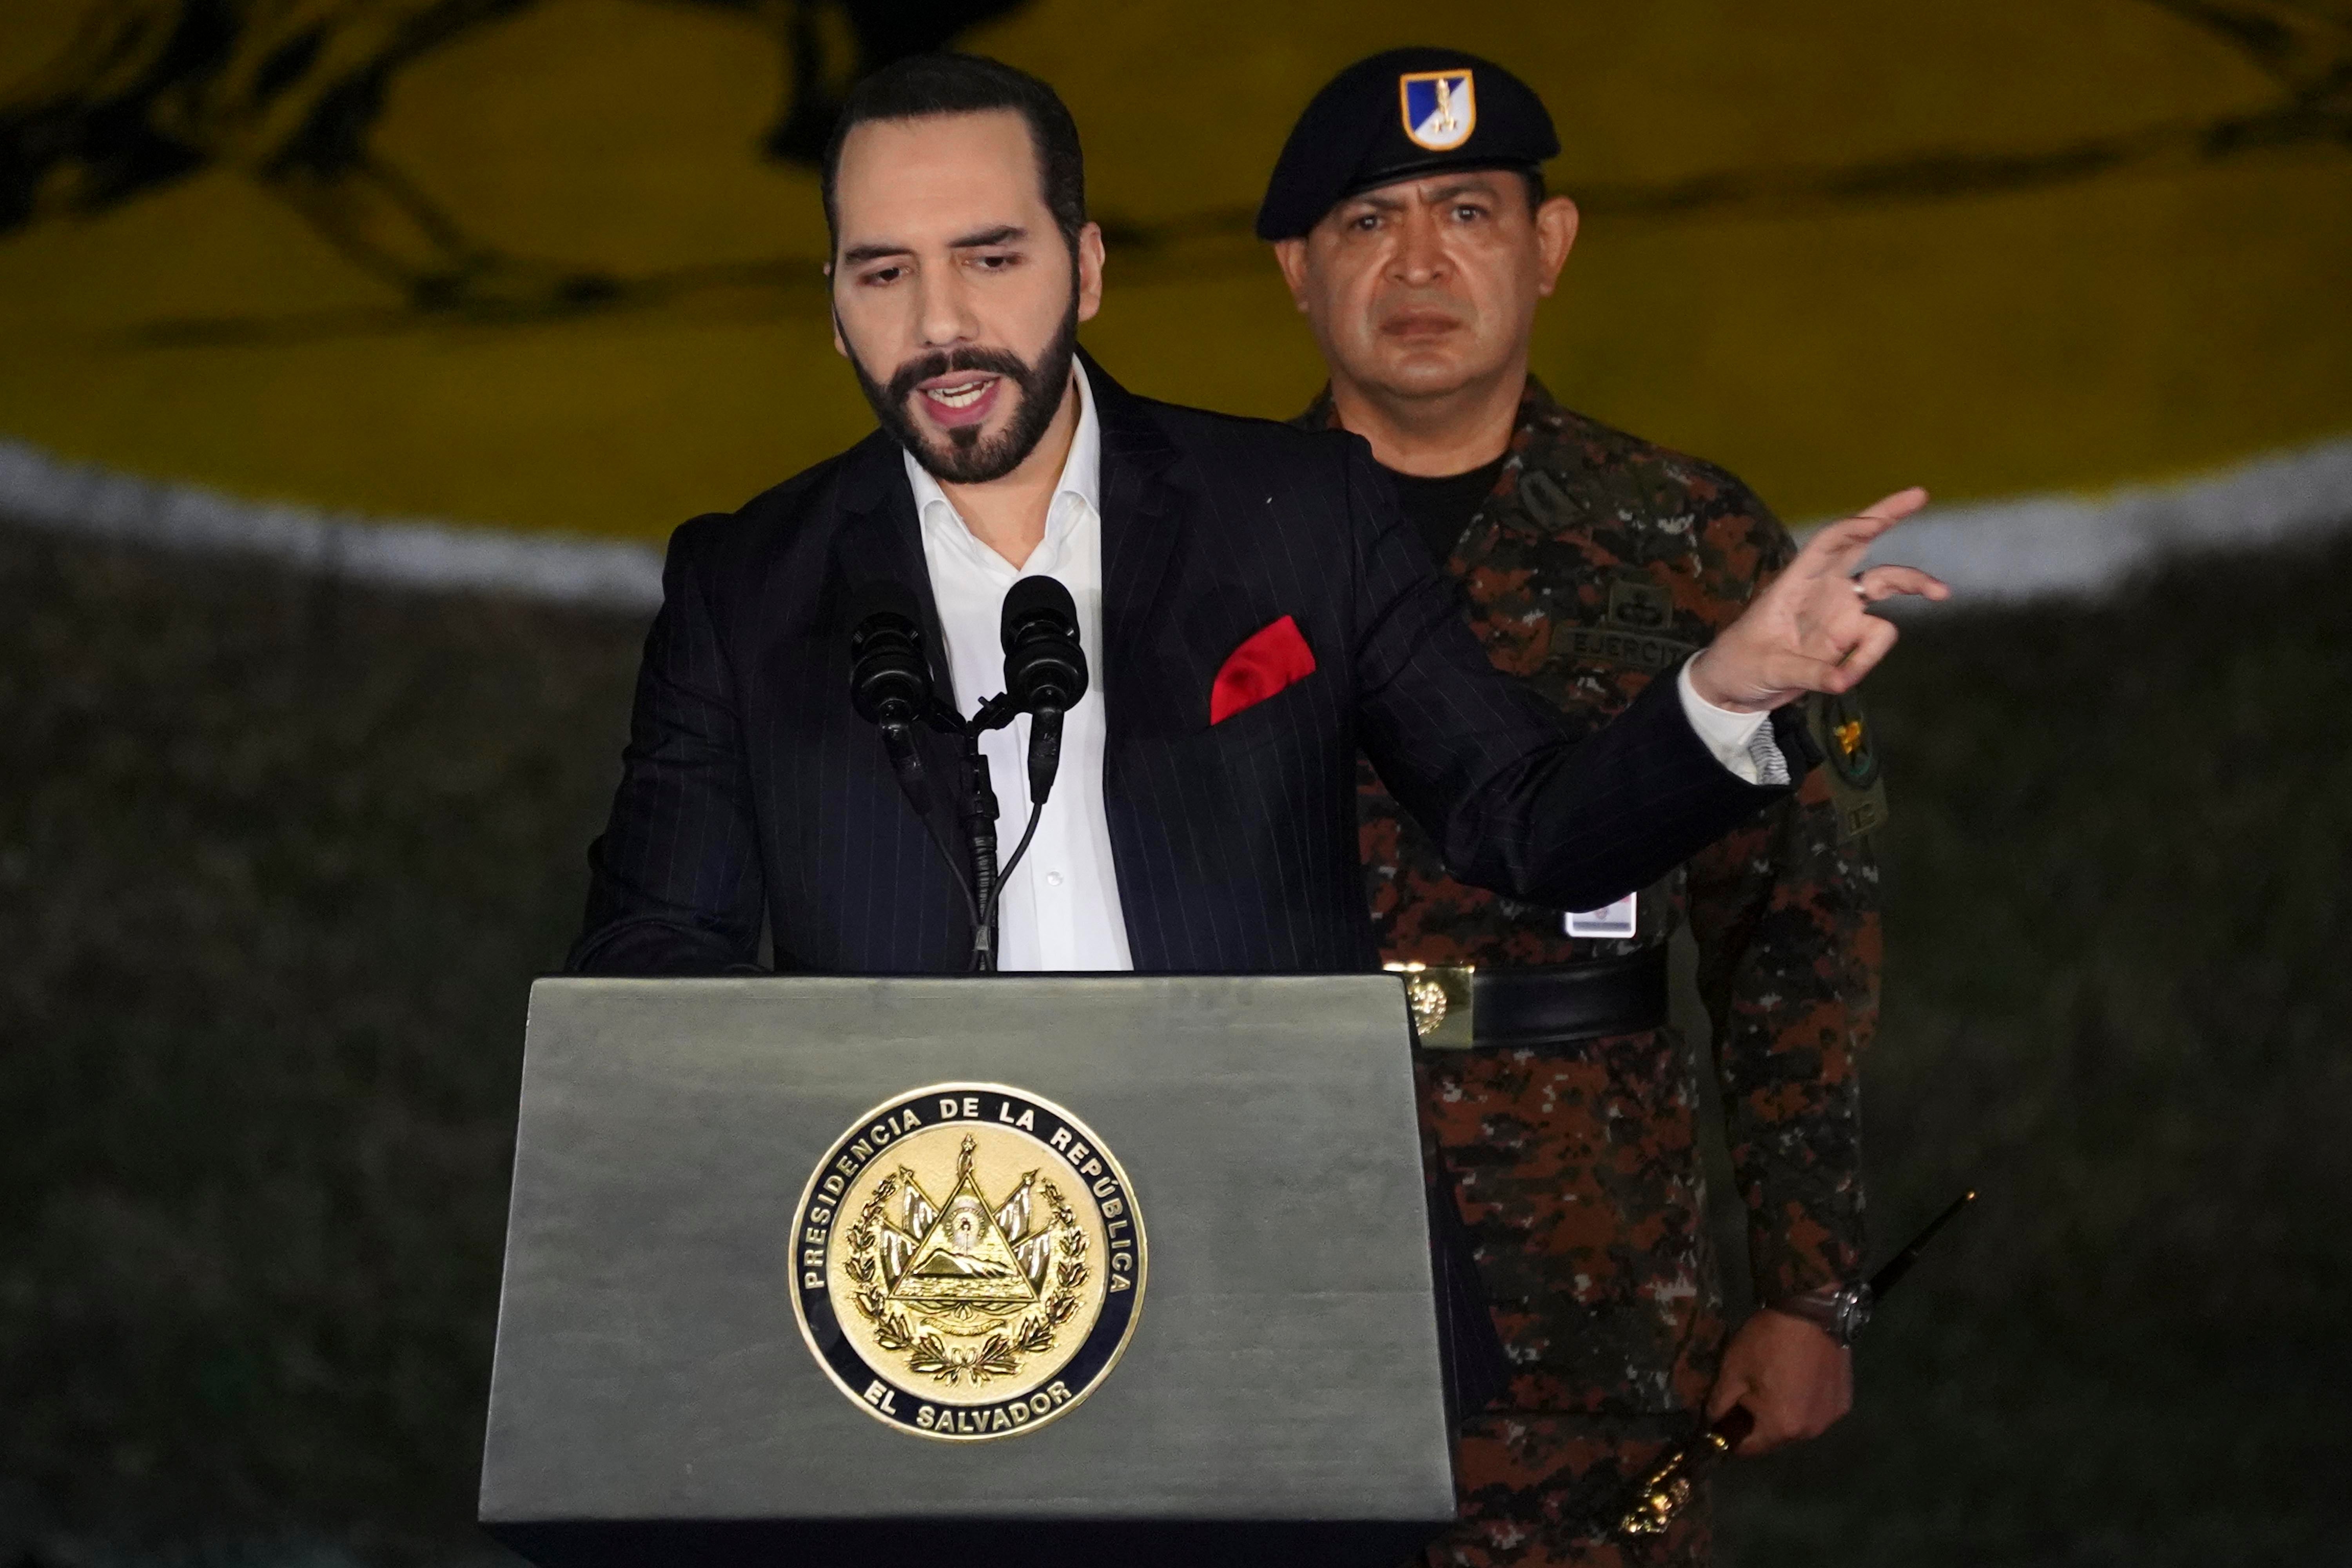 Days after the government declared a 30-day state of emergency because of gang violence, President Nayib Bukele speaks at the induction of 1,440 new soldiers into the armed forces in San Salvador, El Salvador on April 4, 2022.